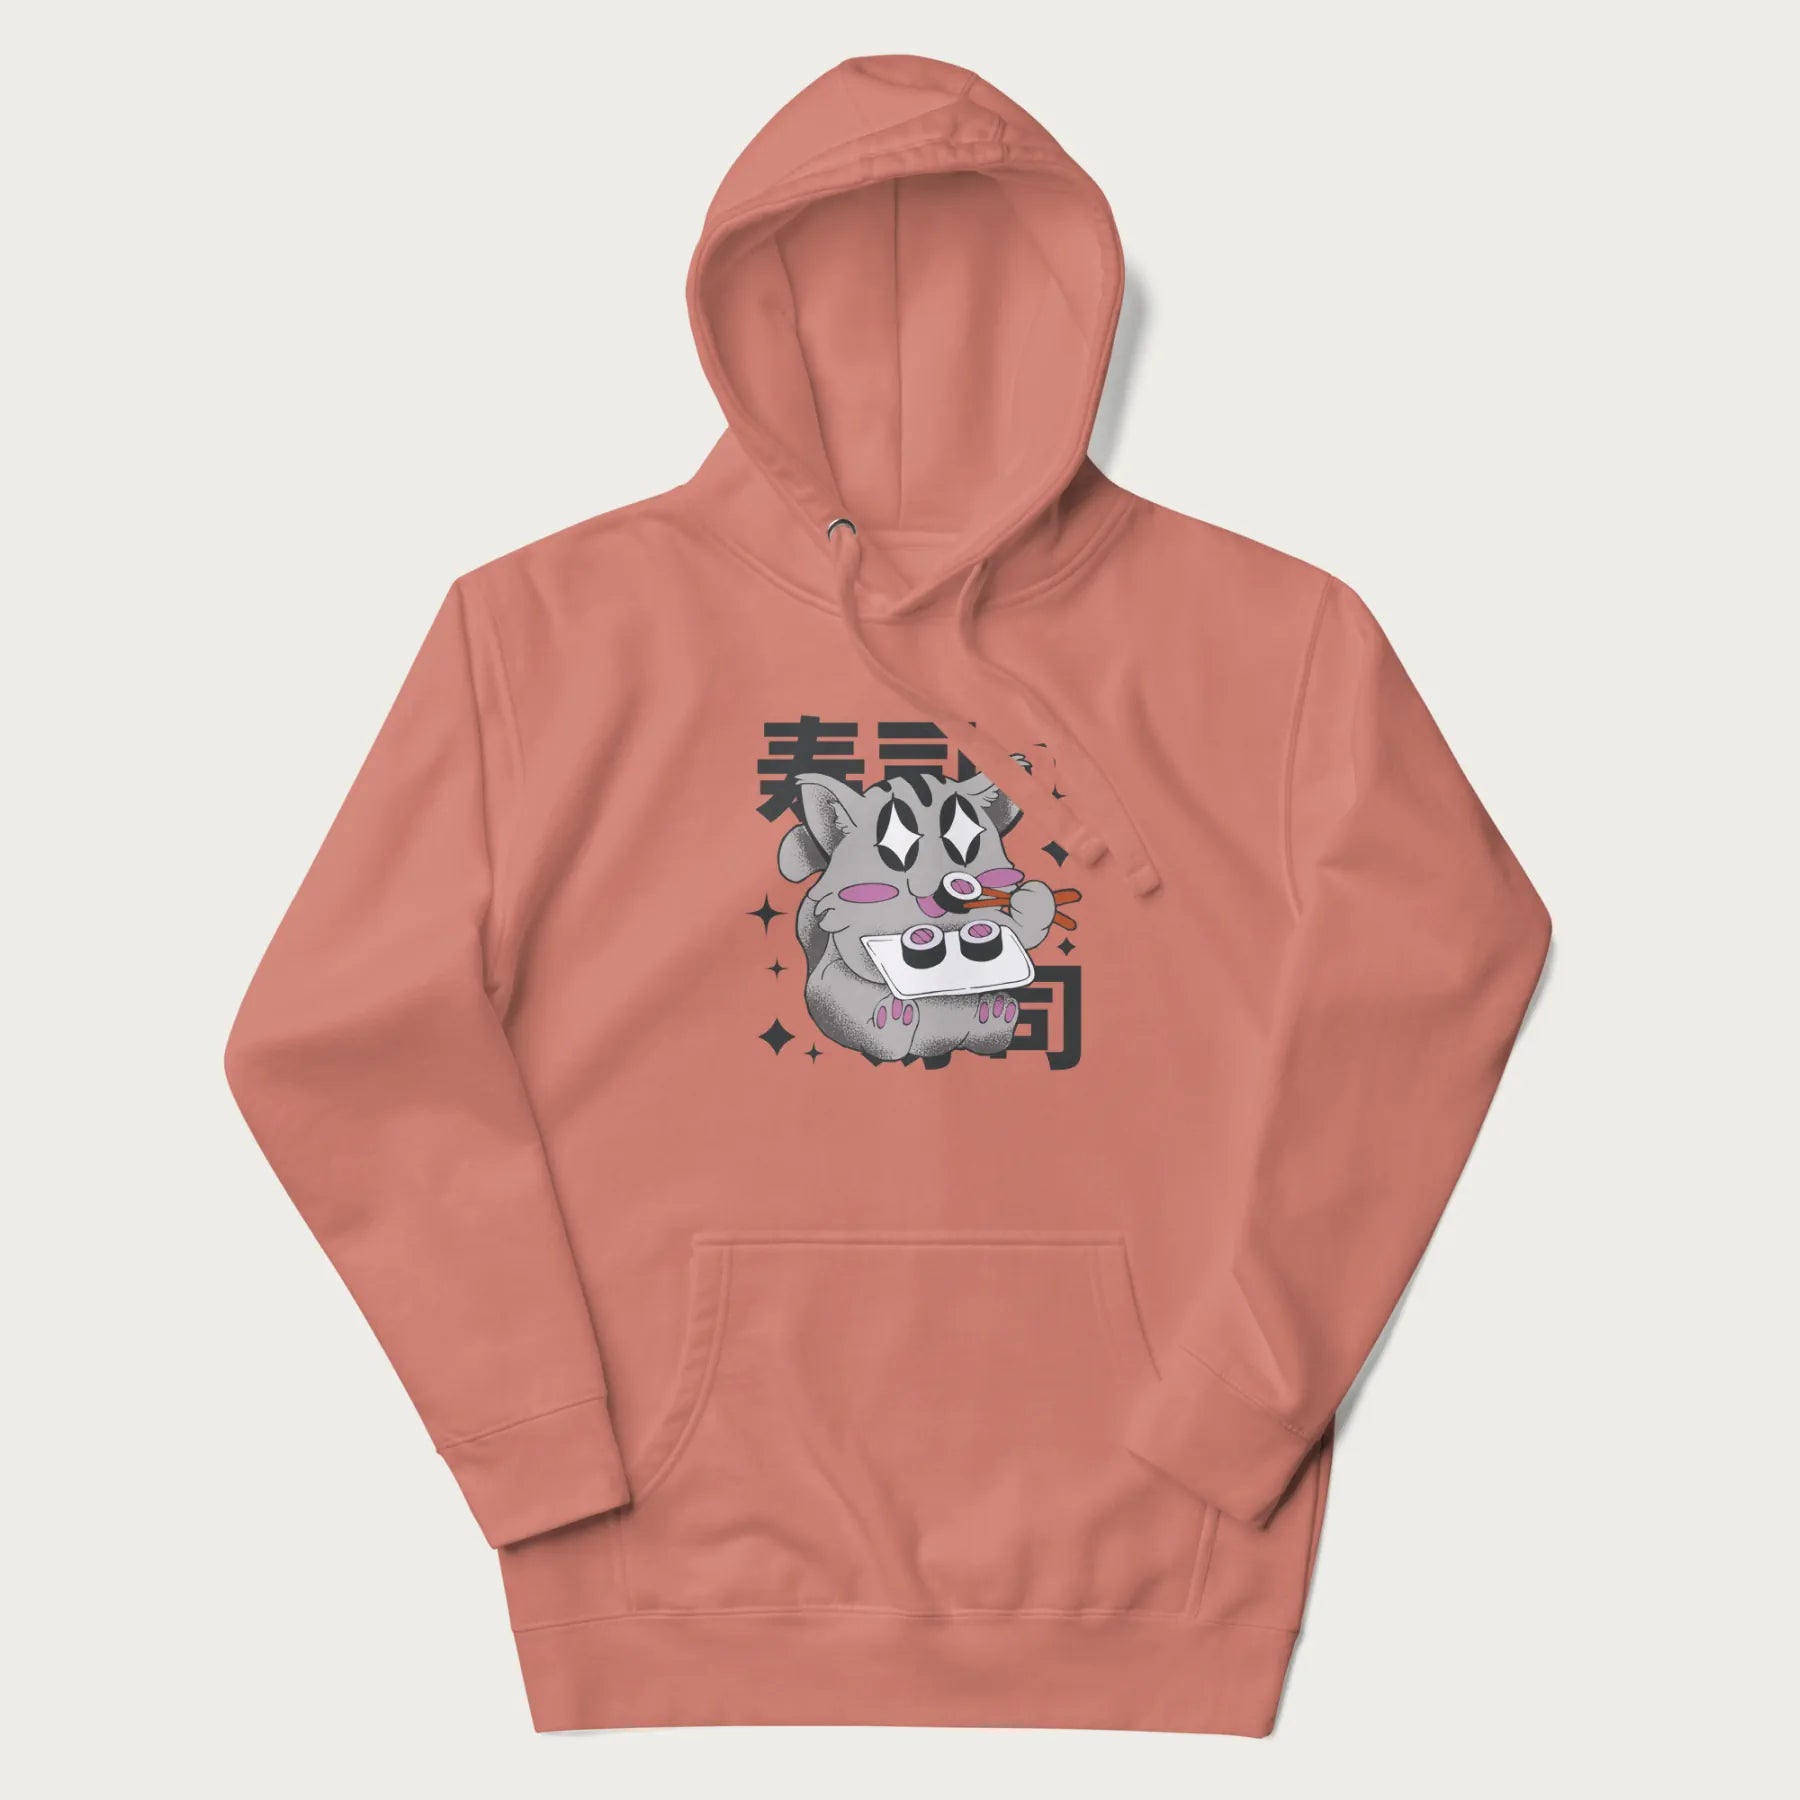 Light pink hoodie with Japanese graphic of a cute grey cat eating sushi, with the Japanese text '寿司' (Sushi) in the background.